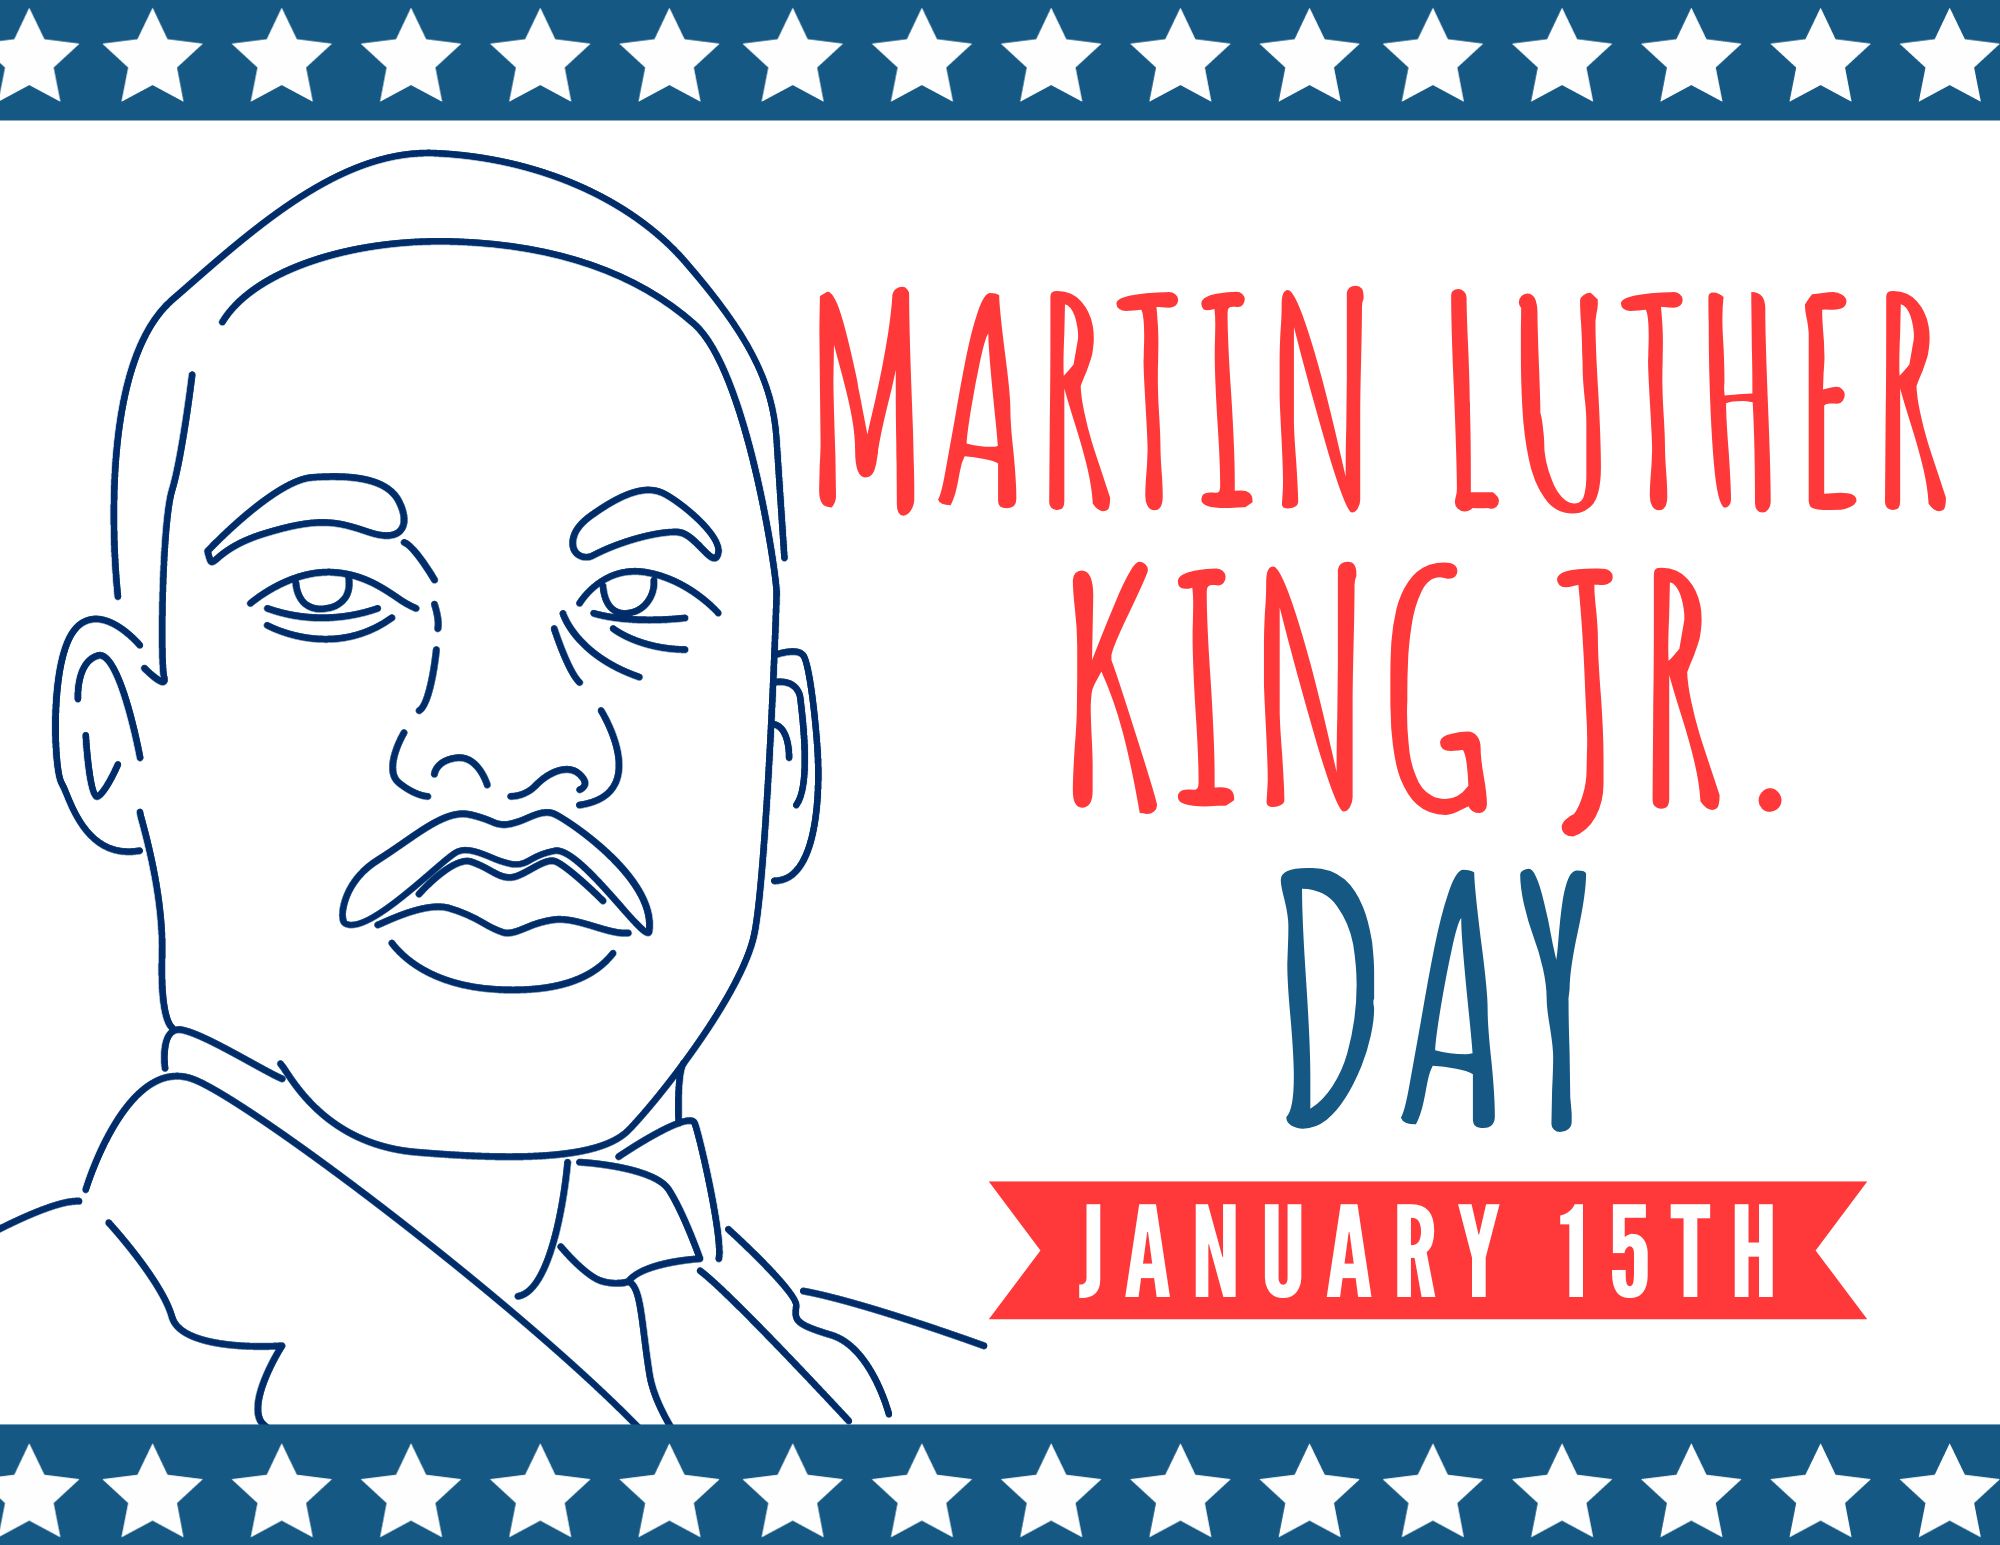 Martin Luther King Jr. Day. January 15th.